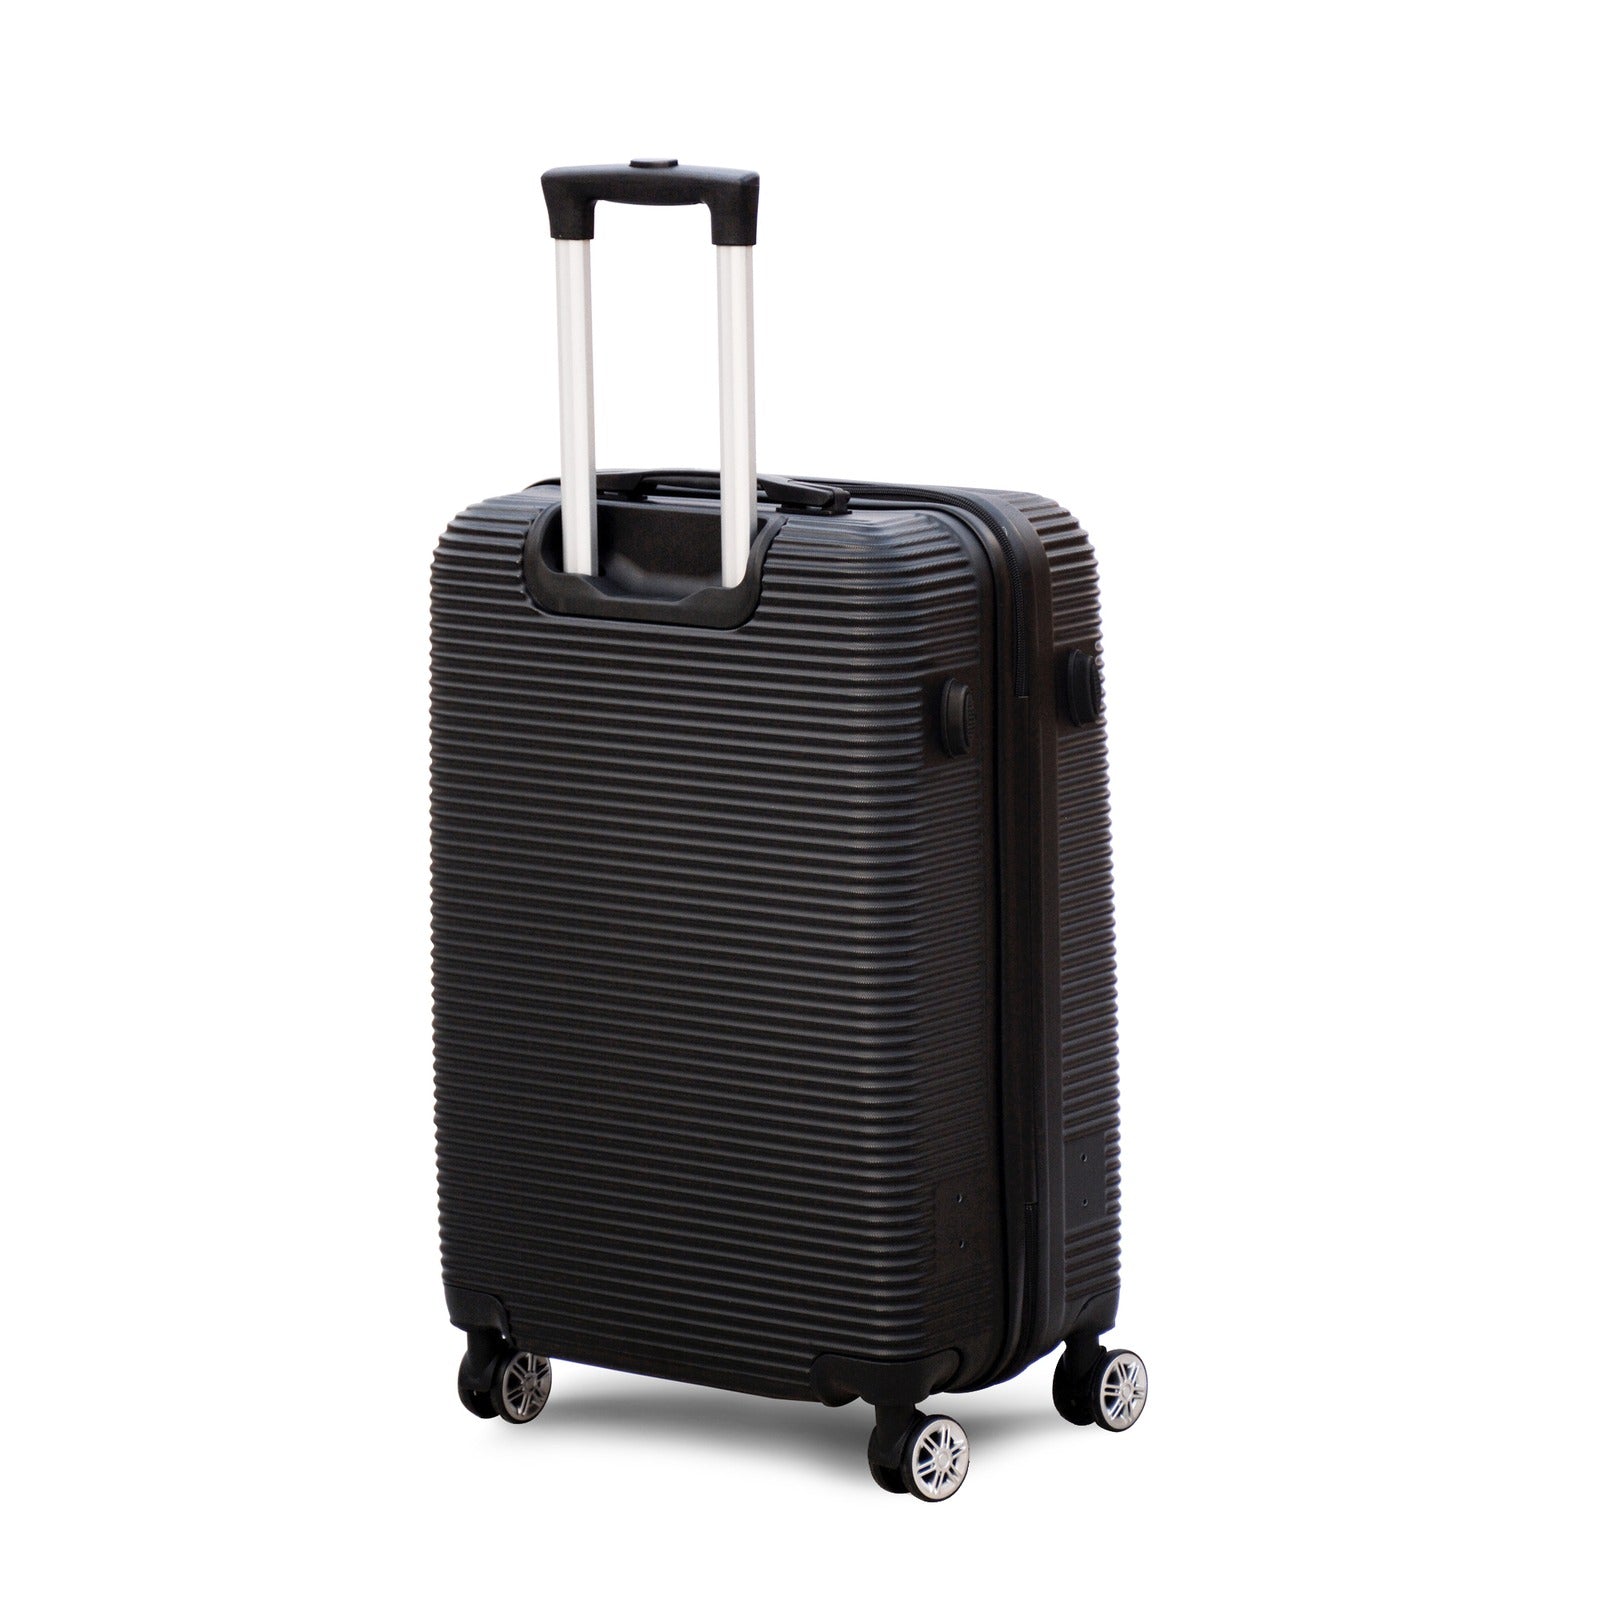 20" Black Colour JIAN ABS Line Luggage Lightweight Hard Case Carry On Trolley Bag With Spinner Wheel